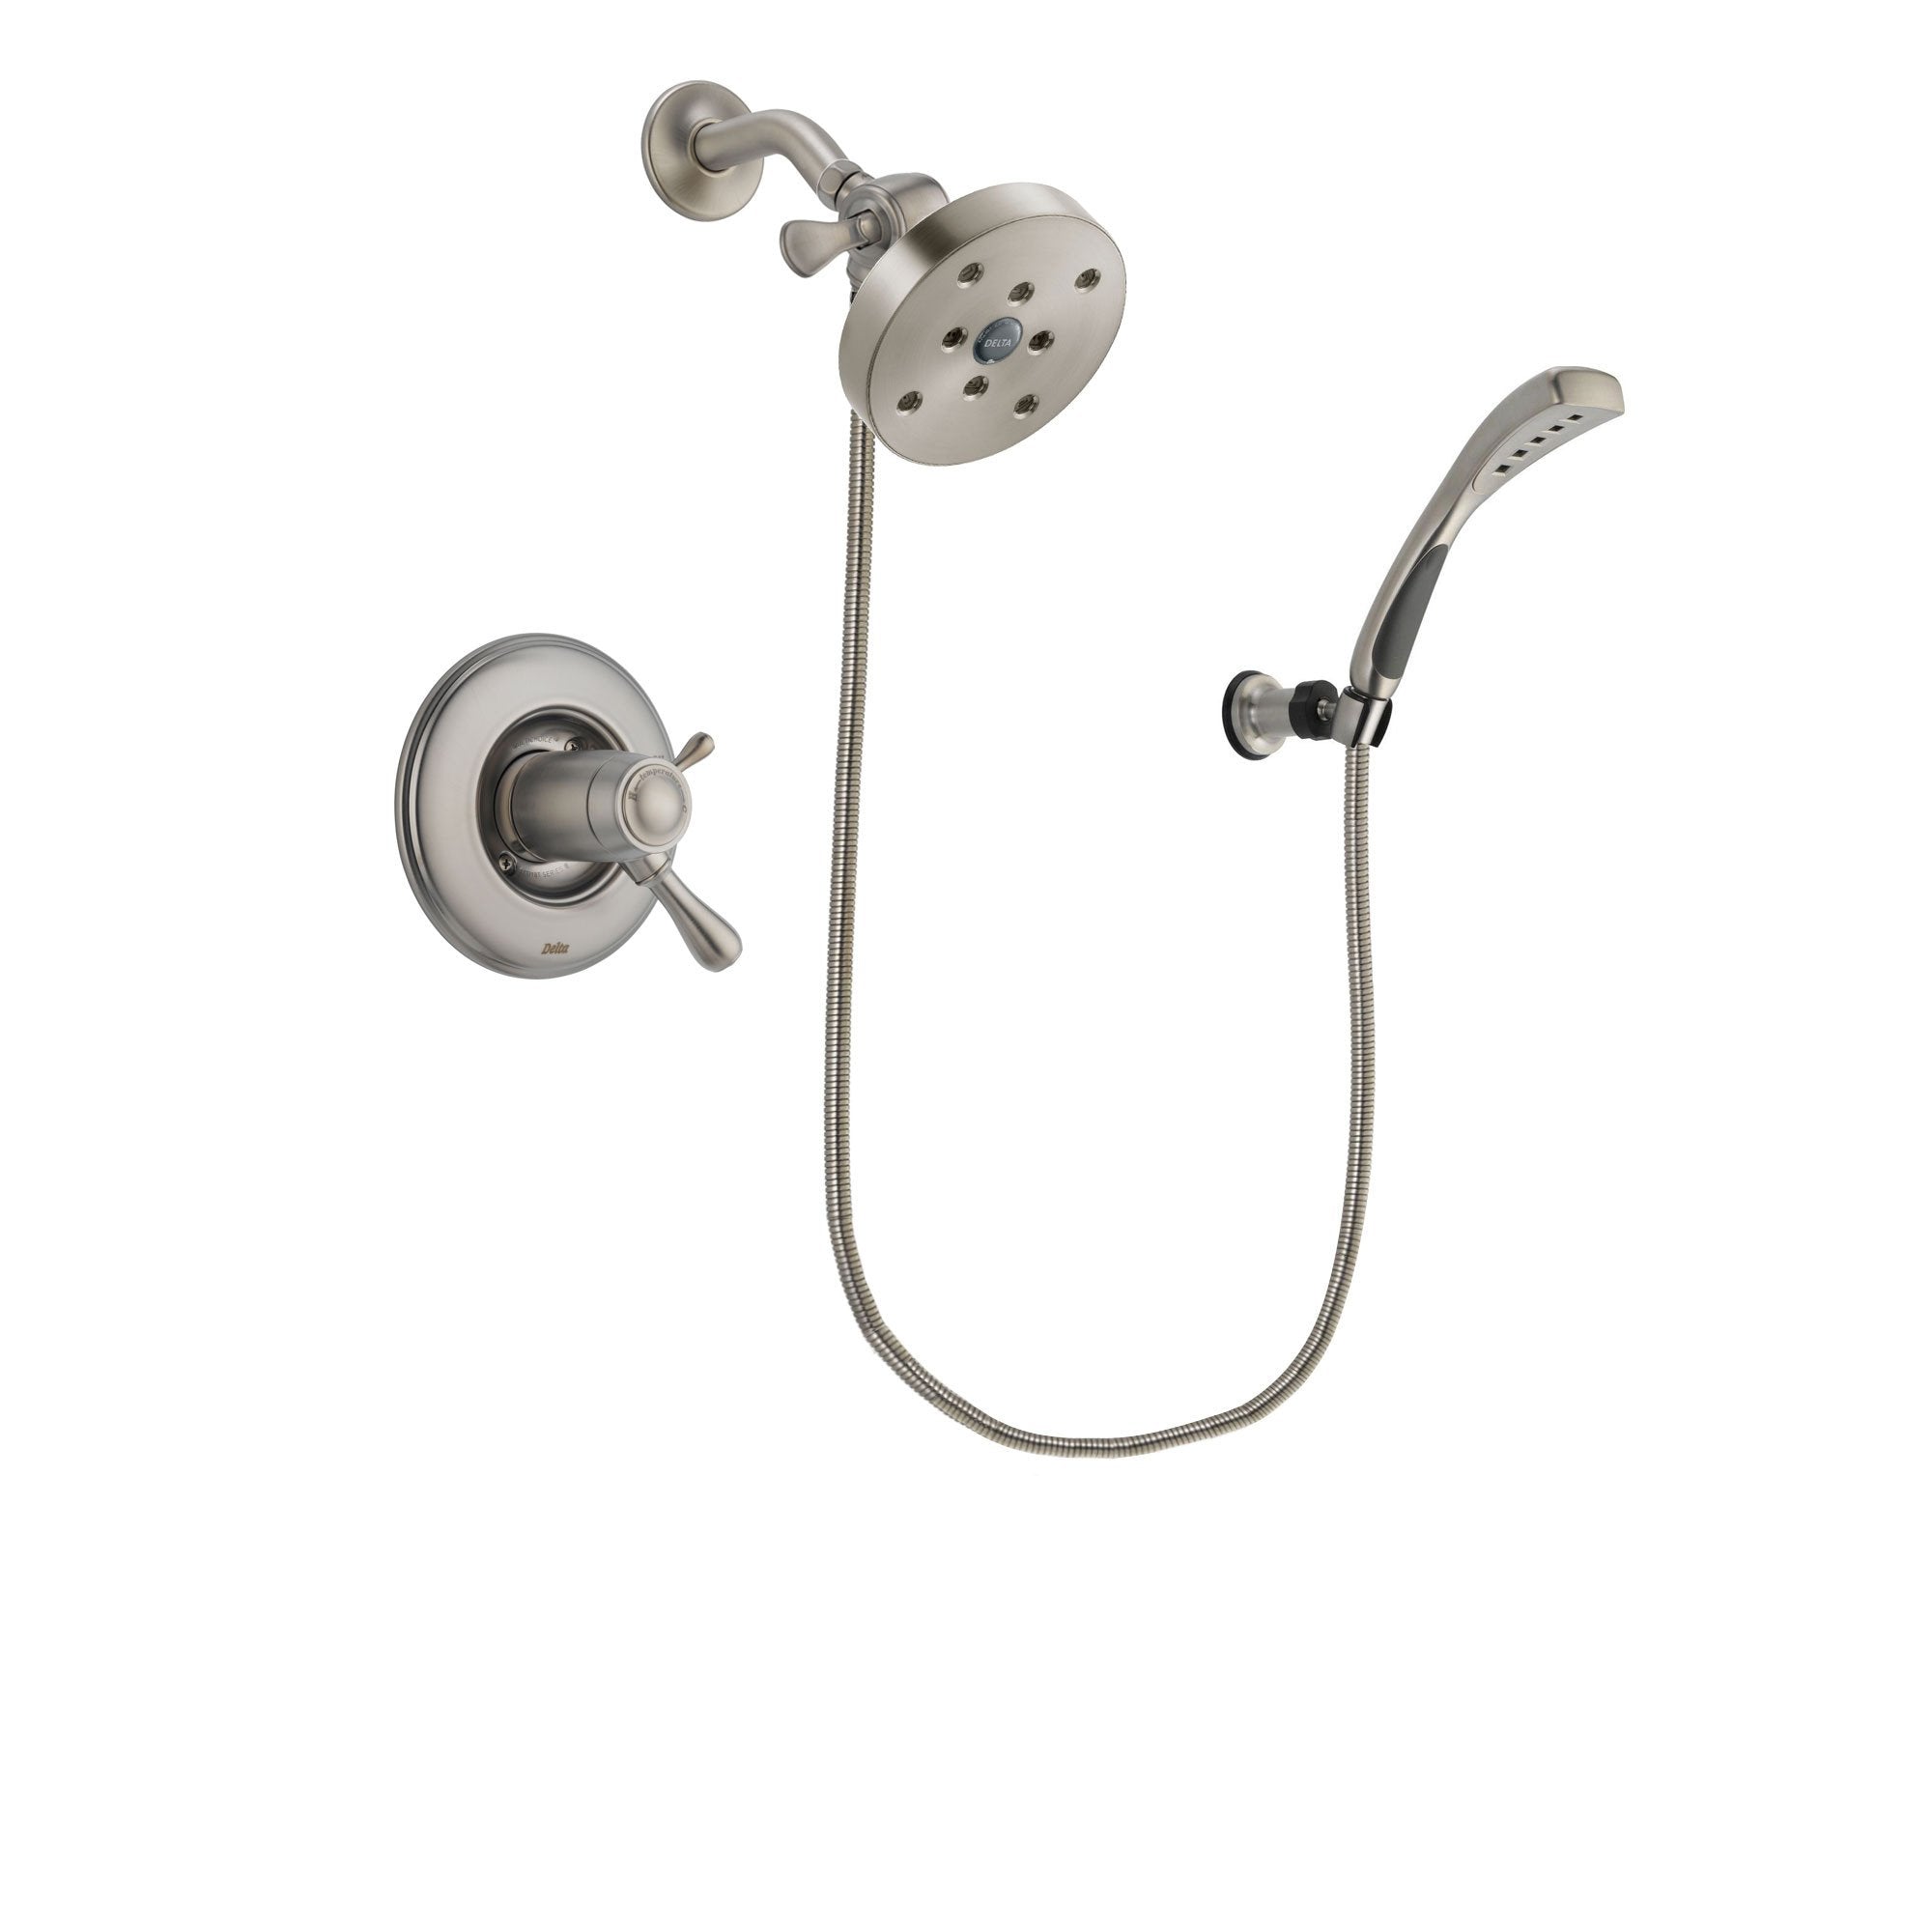 Delta Leland Stainless Steel Finish Thermostatic Shower Faucet System Package with 5-1/2 inch Shower Head and Wall Mounted Handshower Includes Rough-in Valve DSP1892V